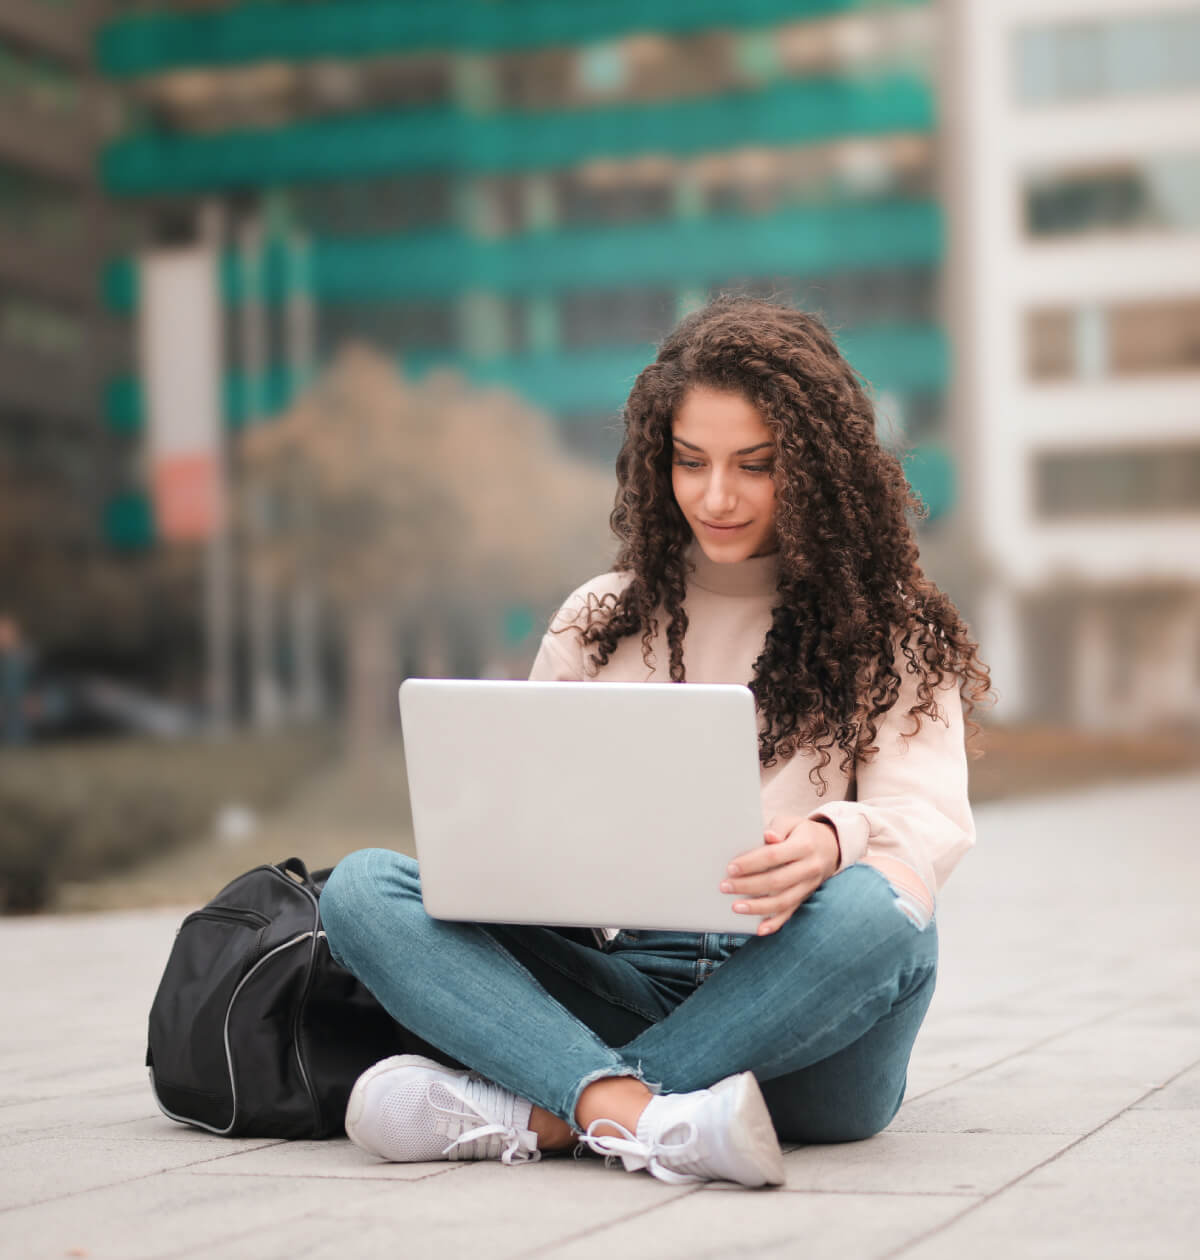 Student on her laptop outside